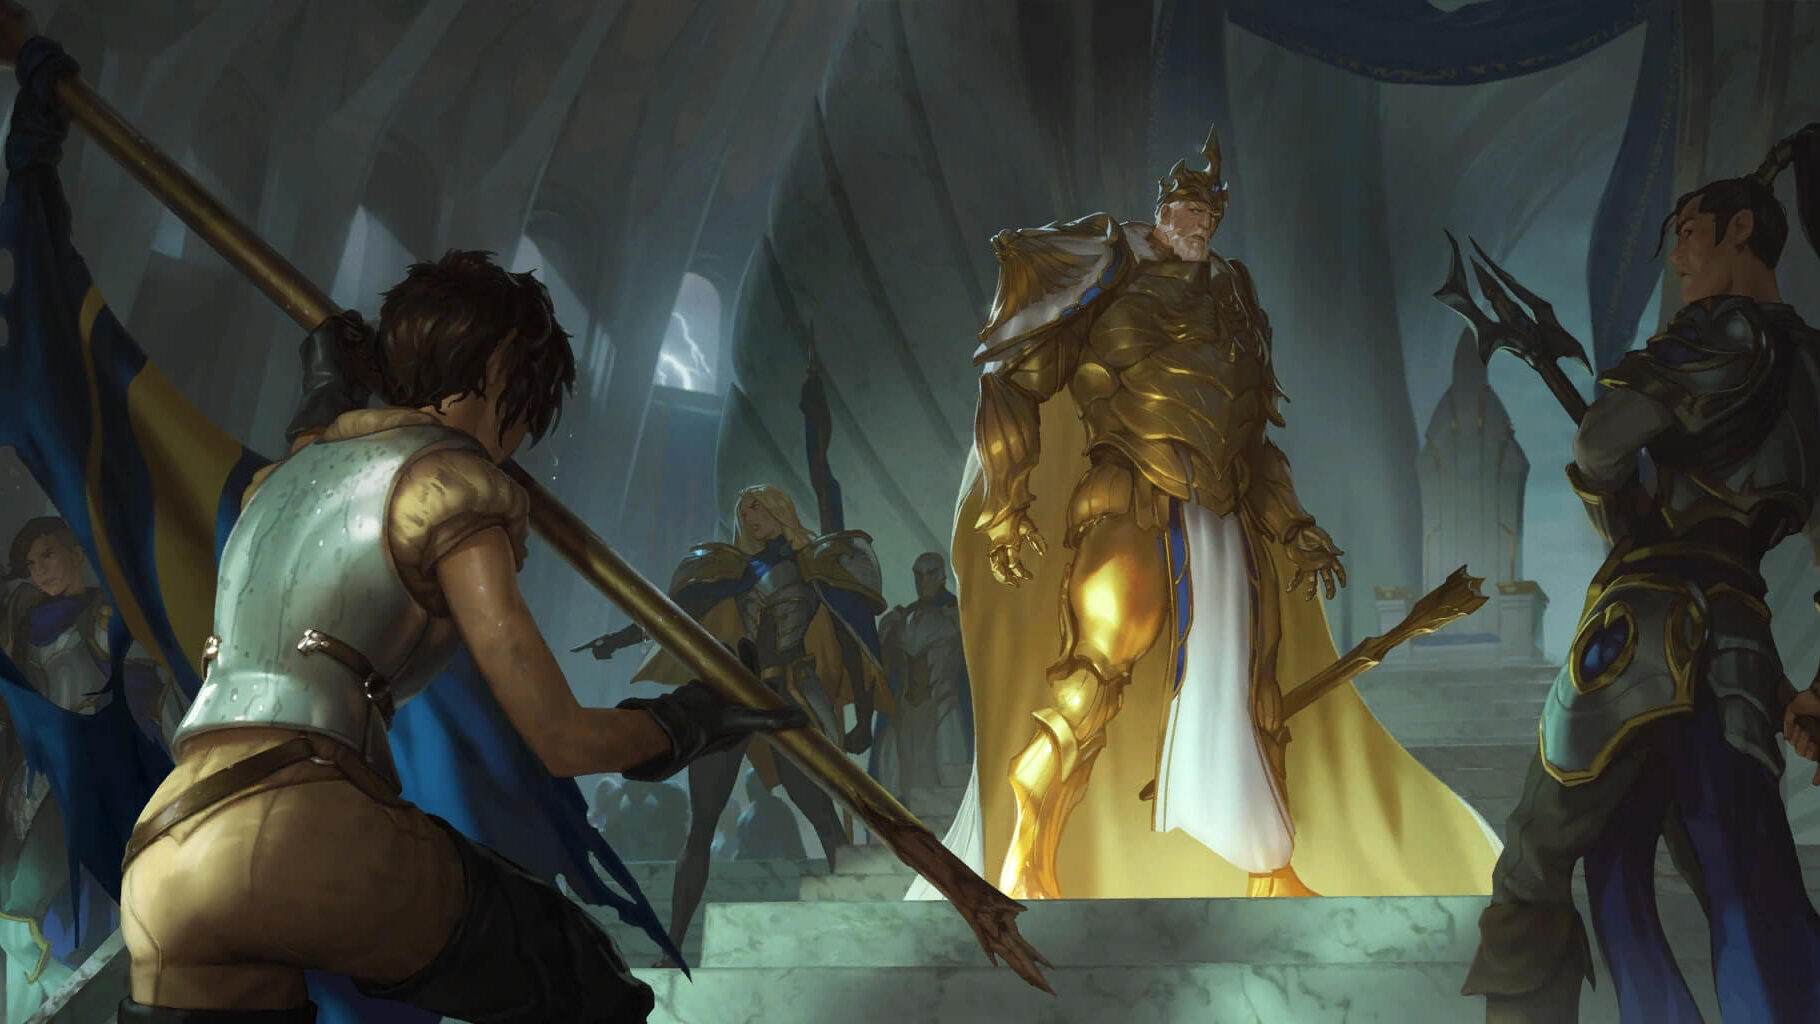 King Jarvan III in the throne room with Xin Zhao and other Demacians